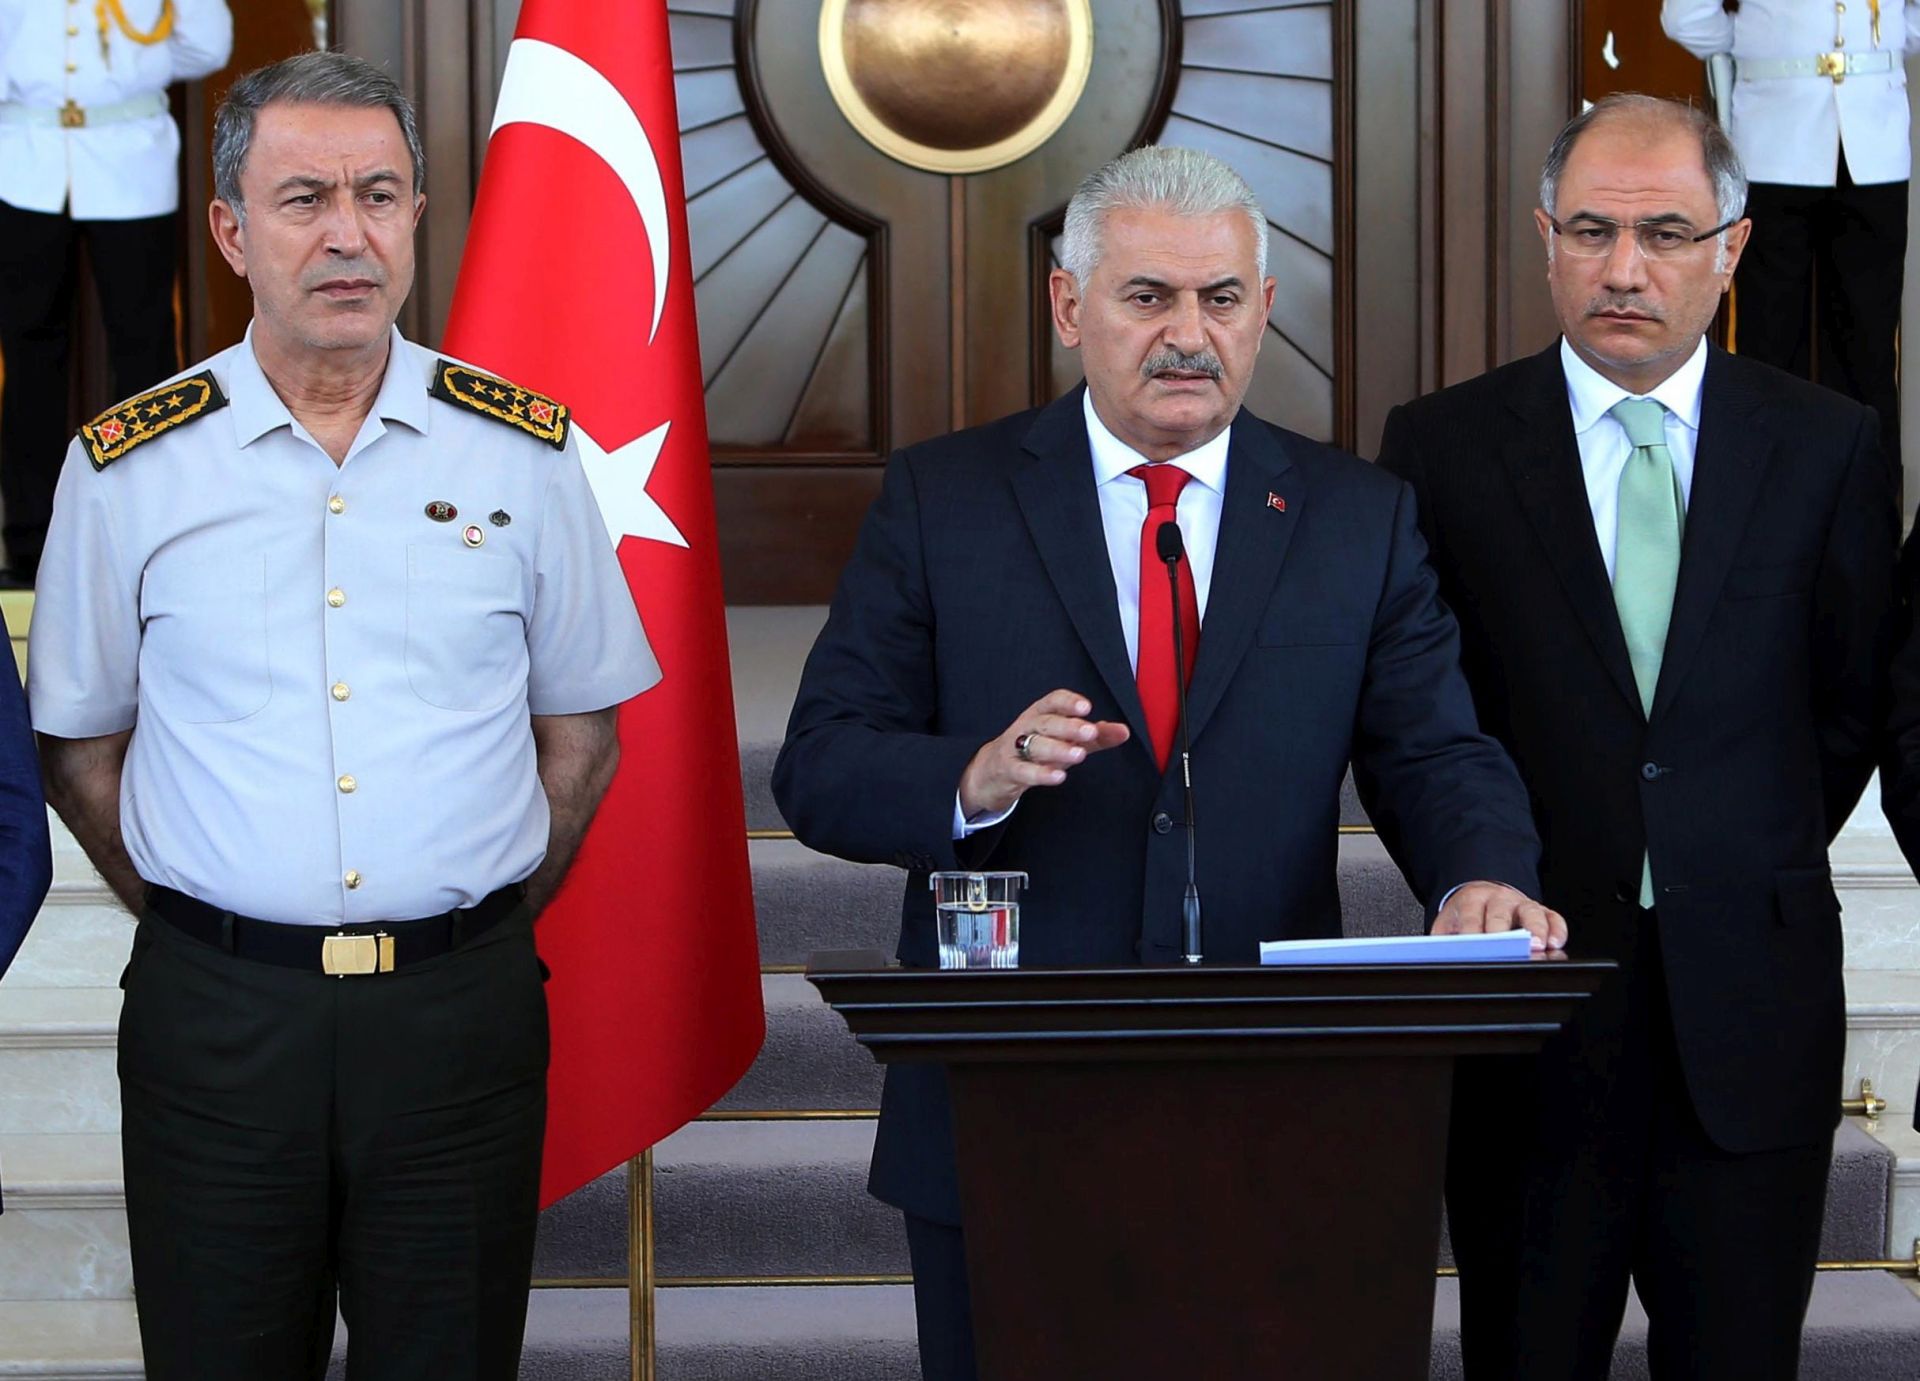 epa05427625 Chief of Staff General Hulusi Akar (L), Turkey's Prime Minister Binali Yildirim (C) and Interior Minister Efkan Ala (R) address a news conference, in Ankara,  Turkey, 16 July 2016. Turkish Prime Minister Yildirim reportedly said that the Turkish military was involved in an attempted coup d'etat. The Turkish military meanwhile stated it had taken over control. According to news reports, Turkish President Recep Tayyip Erdogan has denounced the coup attempt as an 'act of treason' and insisted his government remains in charge. Some 104 coup plotters were killed, 90 people - 41 of them police and 47 are civilians - 'fell martrys', after an attempt to bring down the Turkish government, the acting army chief General Umit Dundar said in a televised appearance.  EPA/STR